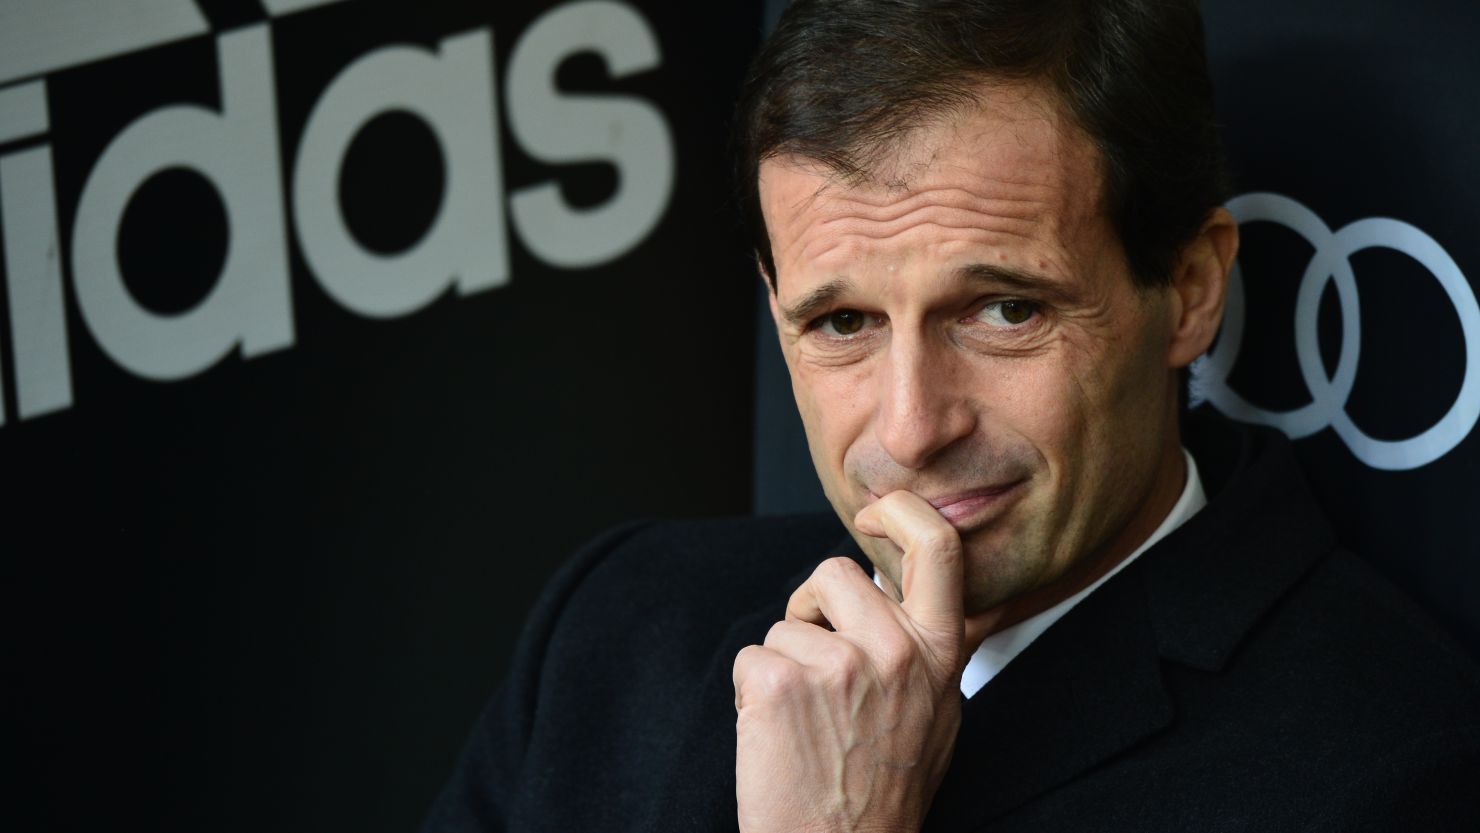 Massimiliano Allegri spent two years at Cagliari before taking over at AC Milan in 2010.